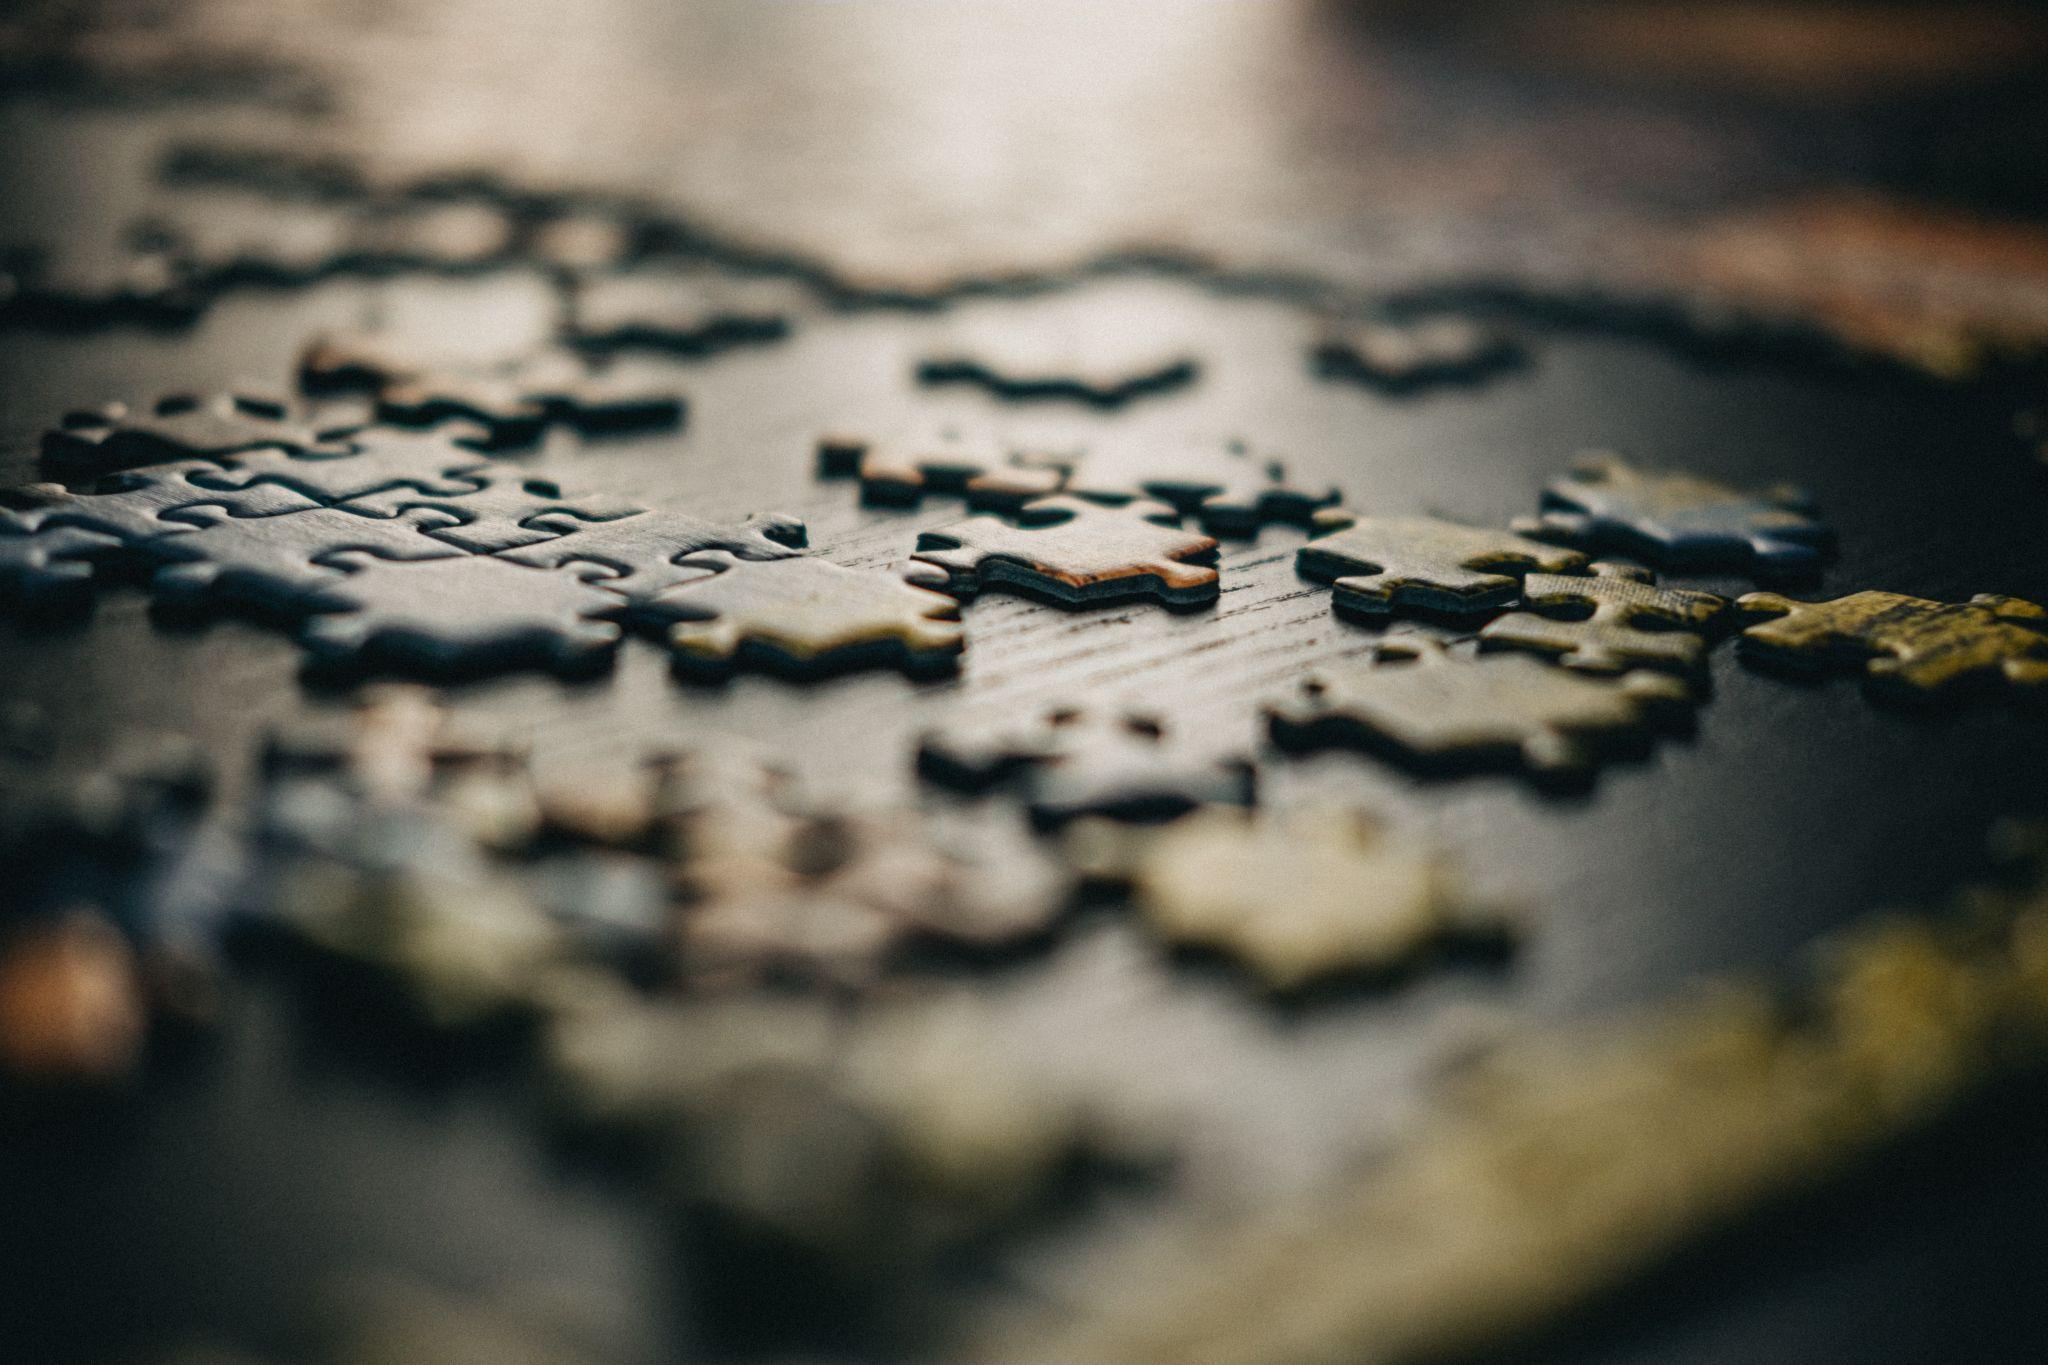 Jigsaw pieces laid out on a black wooden table